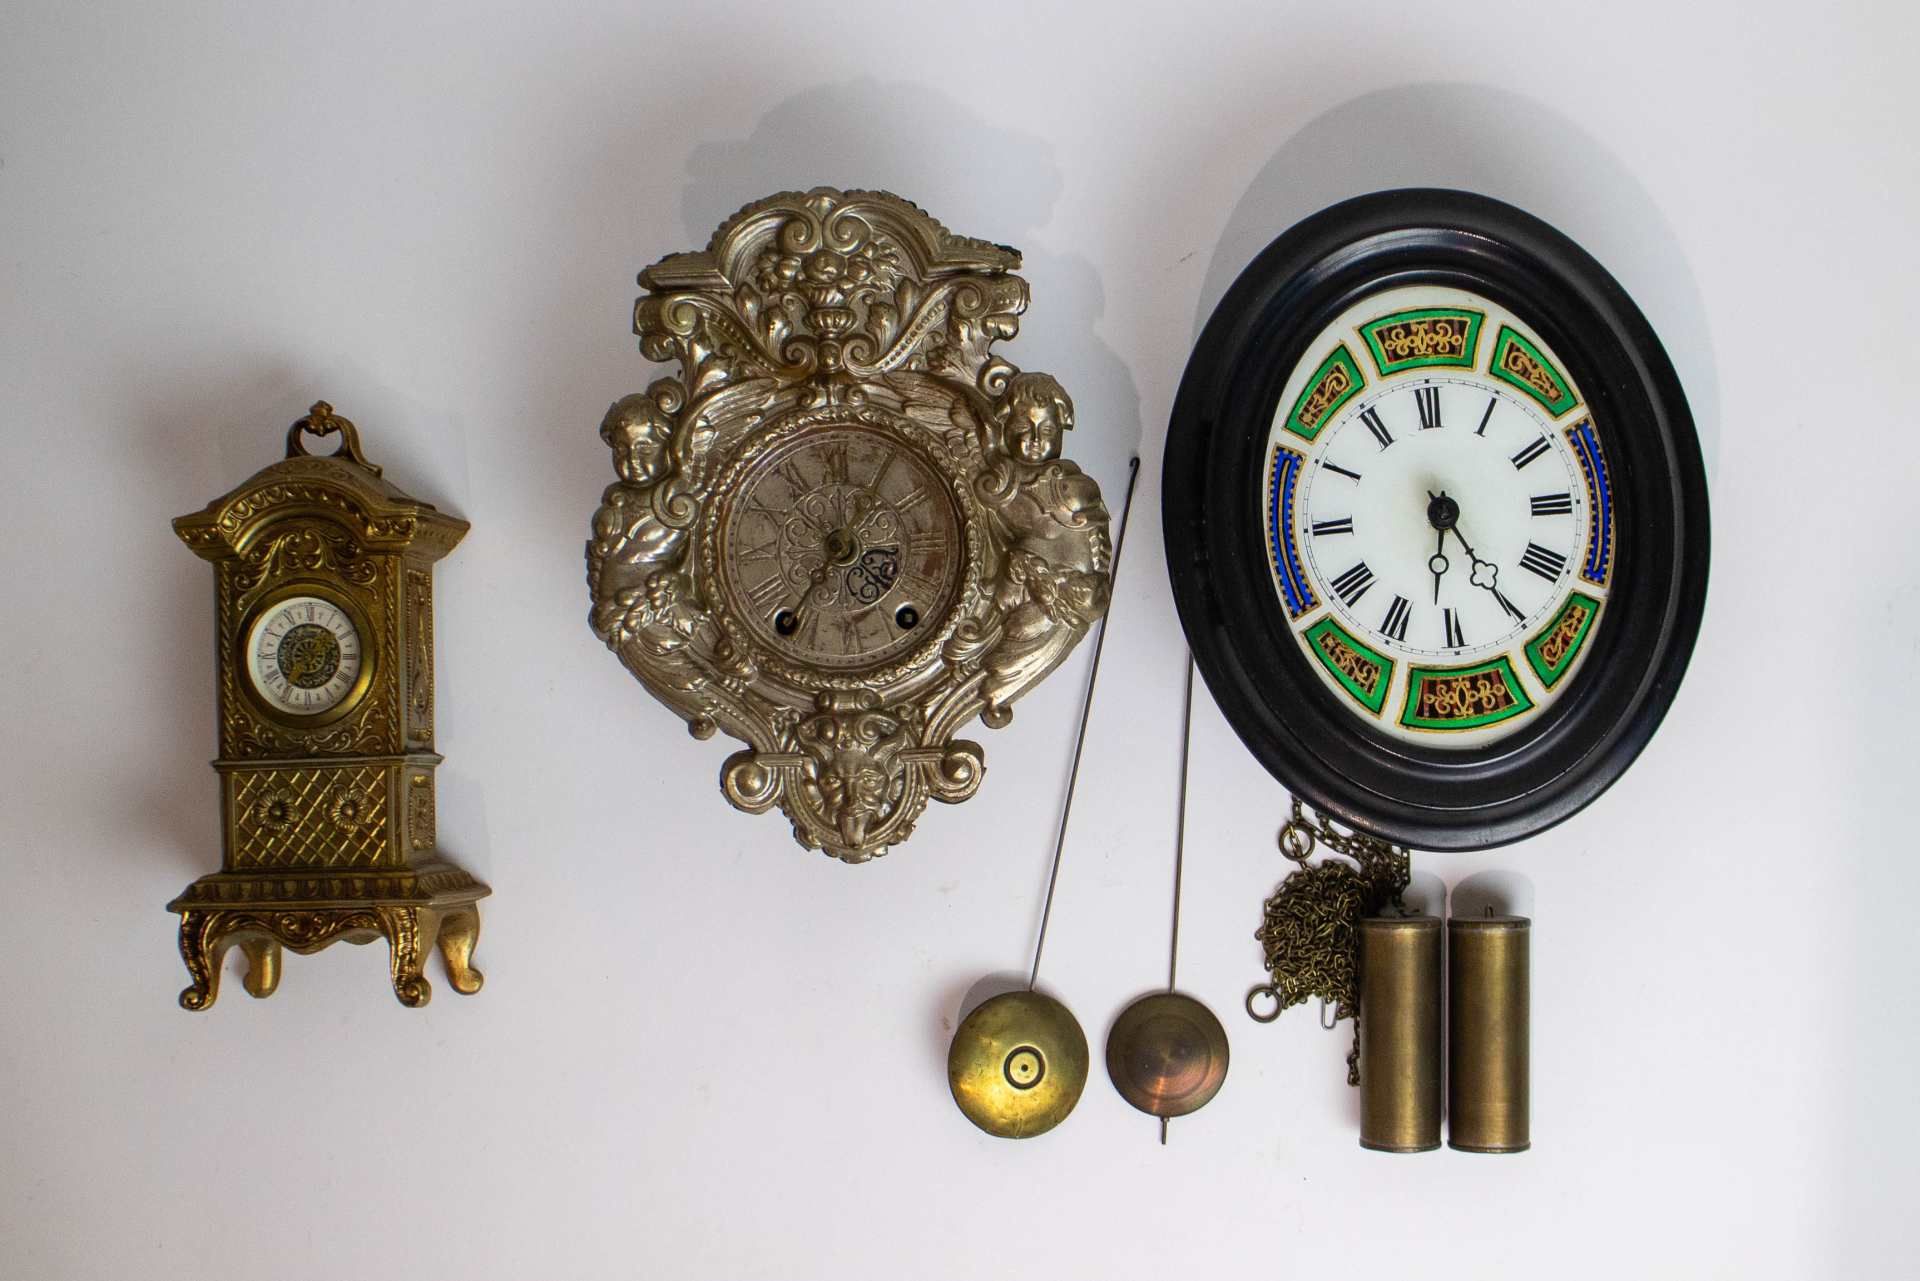 Lot clocks Black forest, wall clock and table clock